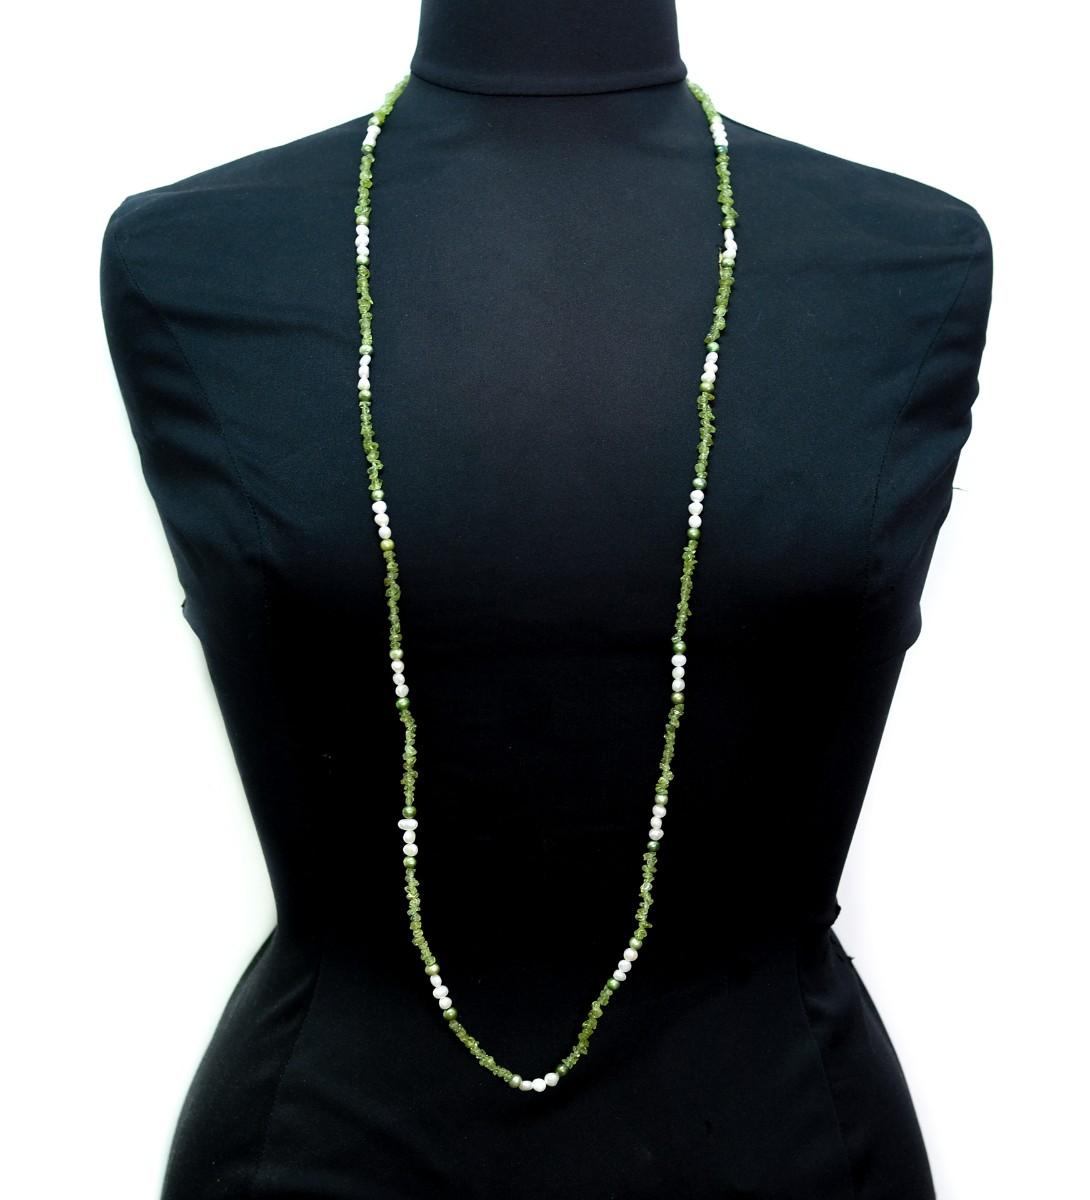 LS Green Stone & Pearl Necklace | EstateSales.org